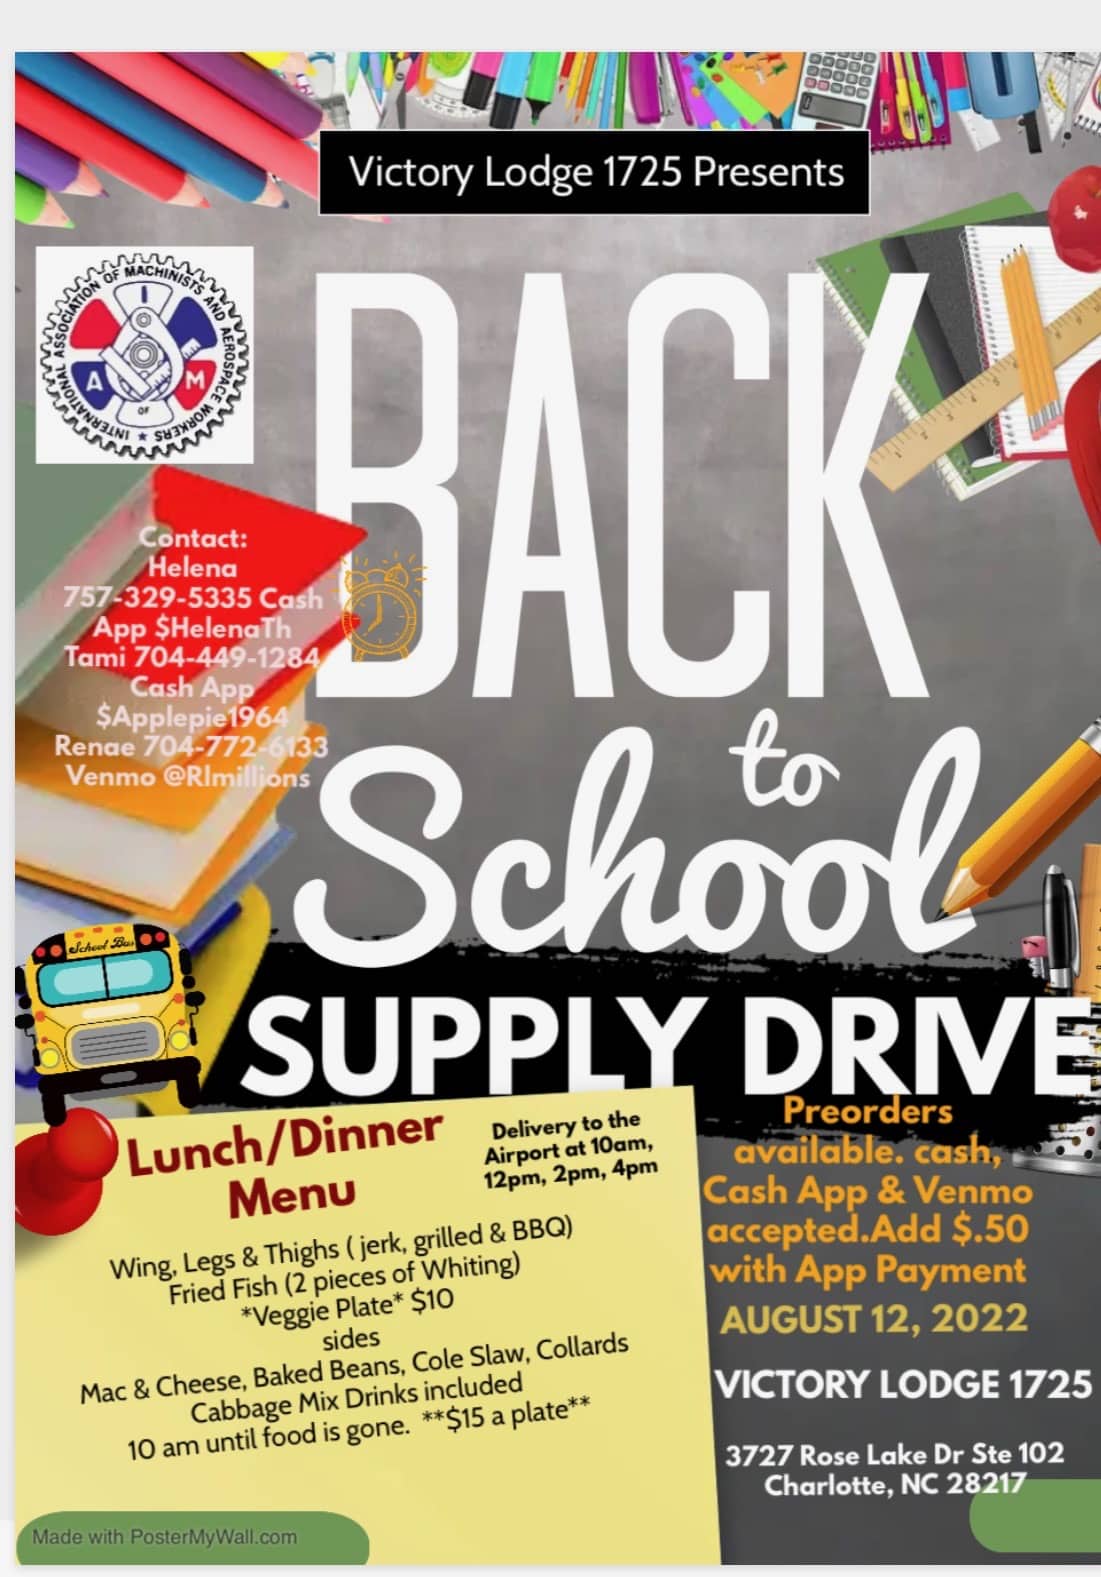 BACK TO SCHOOL SUPPLY DRIVE!!